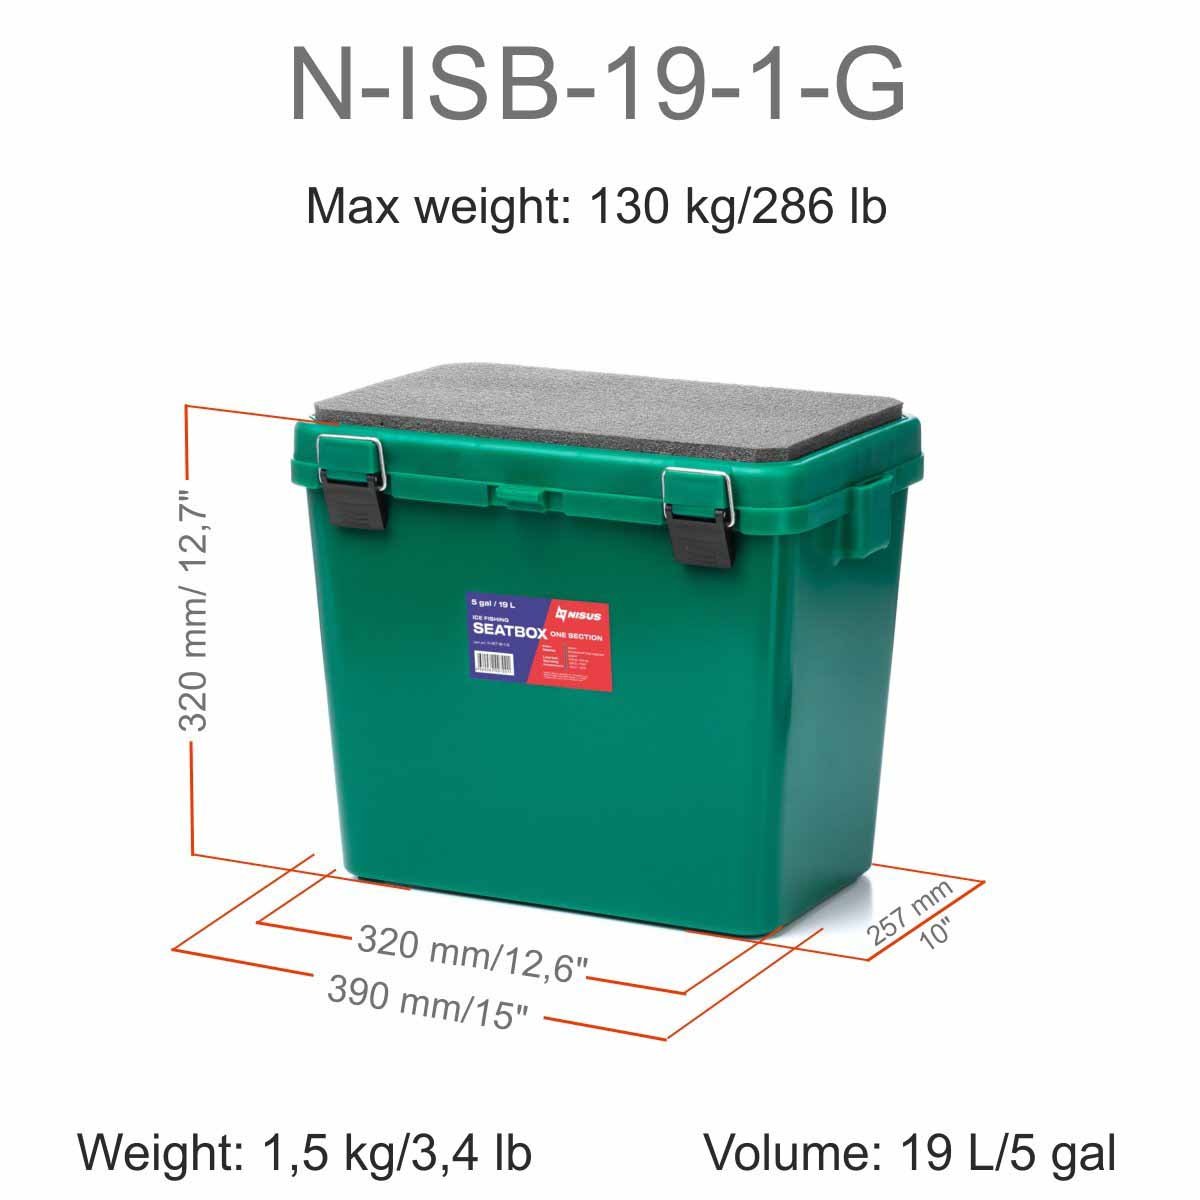 5 Gal Ice Fishing Bucket Type Box with Seat and Adjustable Shoulder Strap cpuld carry up to 286 pounds, it is 12.7 inches high, 12.6 inches long and 10 inches wide, weighing 3.4 lbs